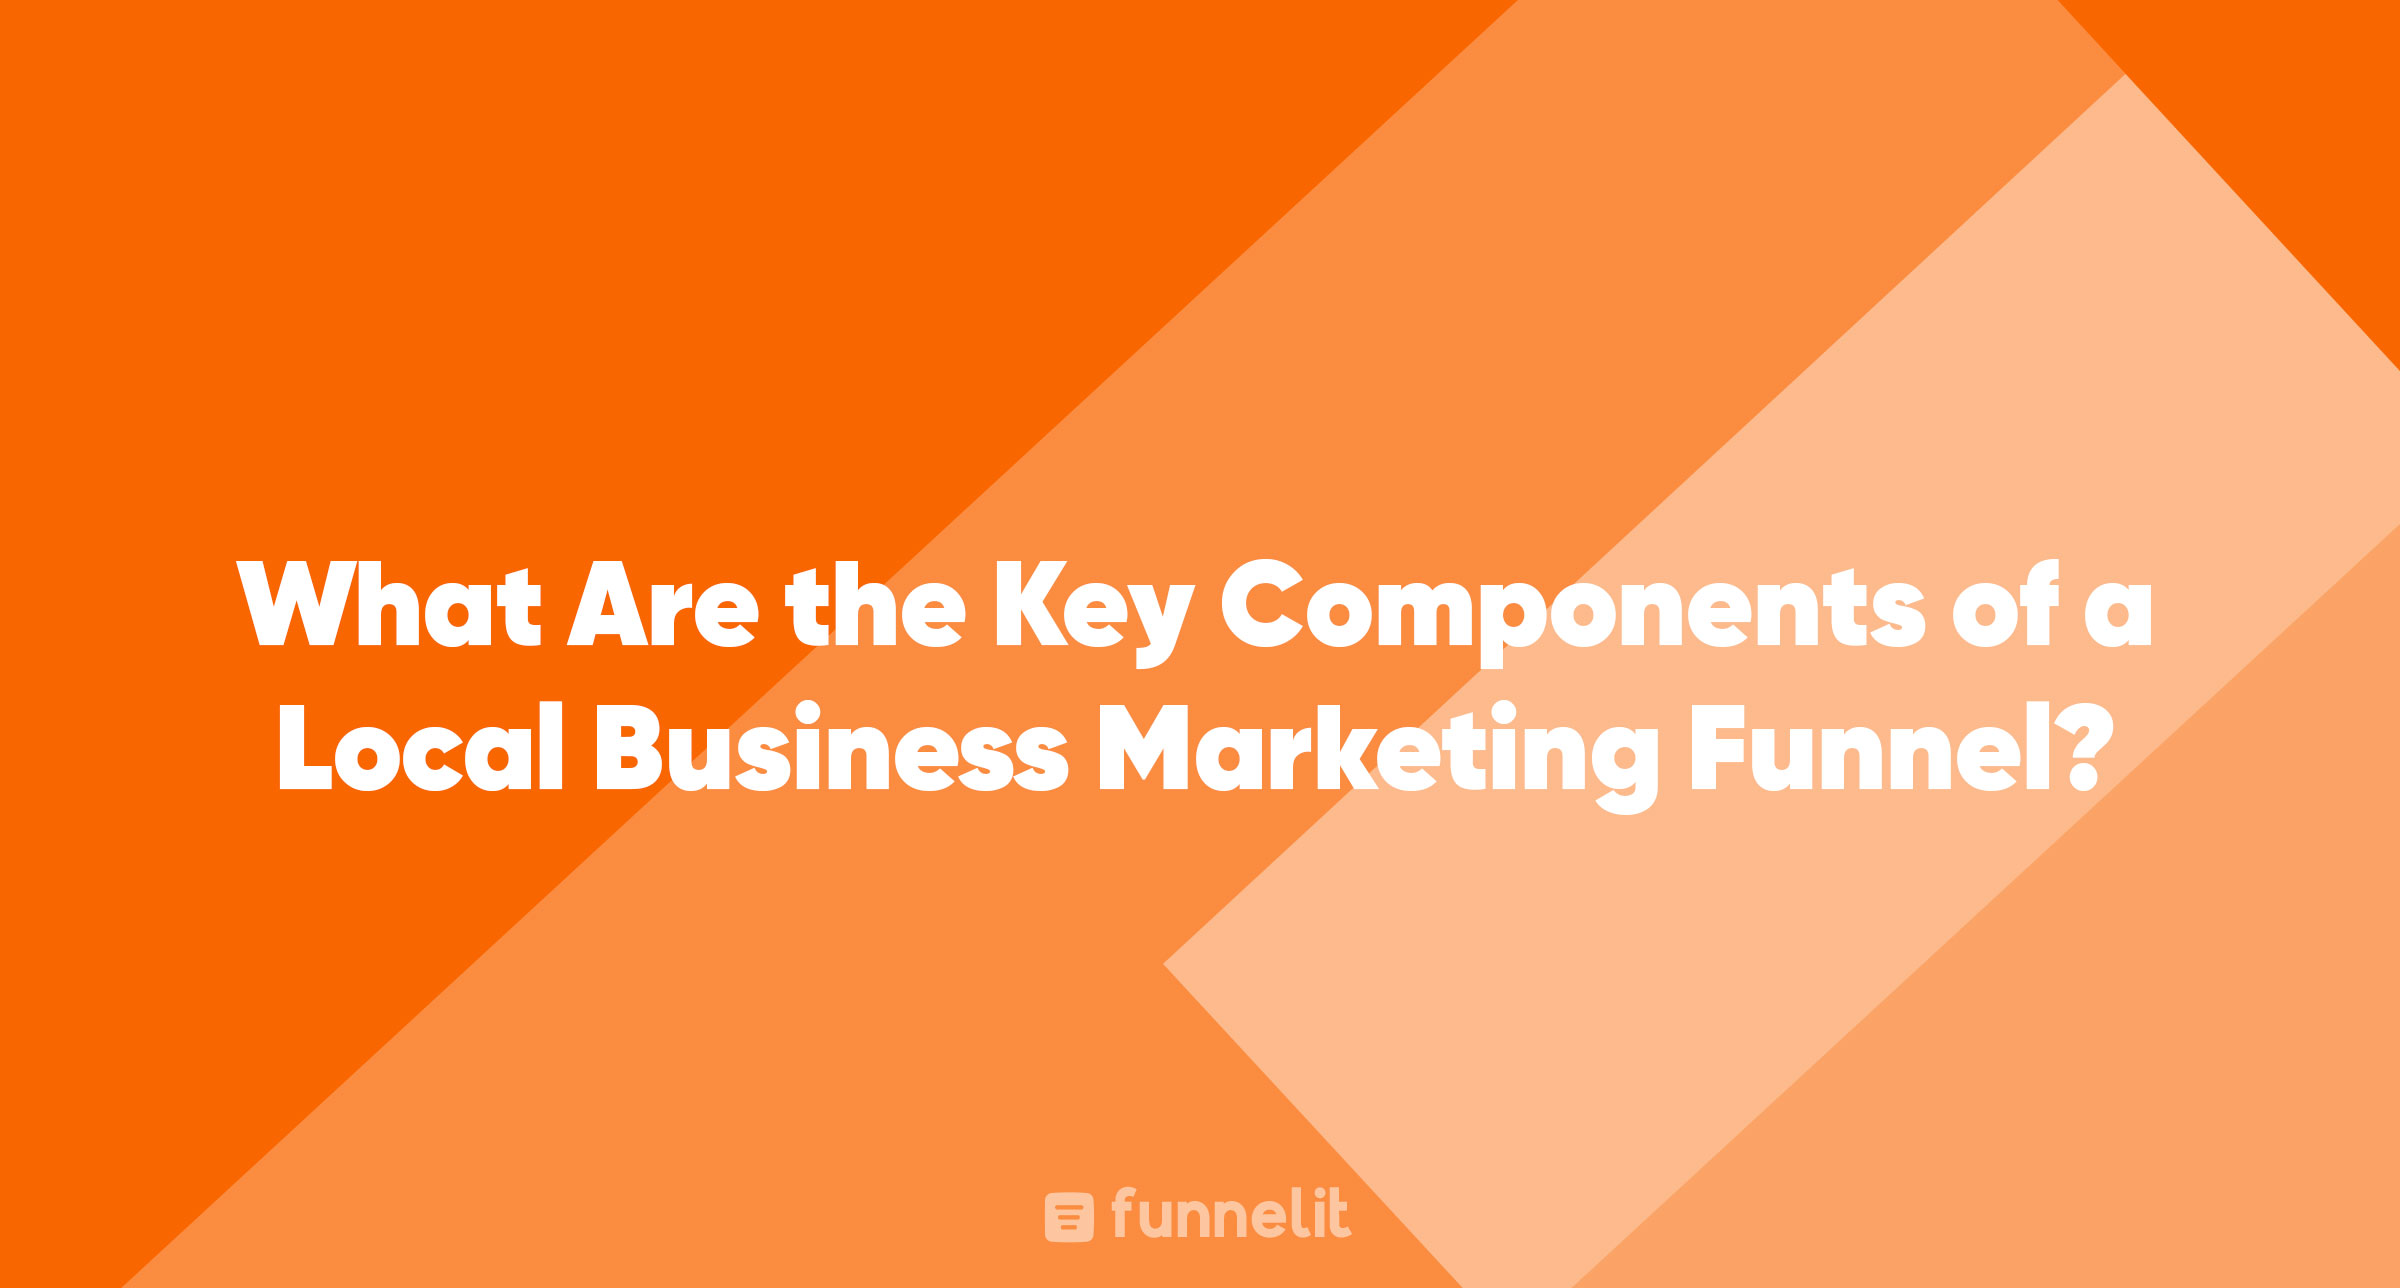 Article | What Are the Key Components of a Local Business Marketing Funnel?